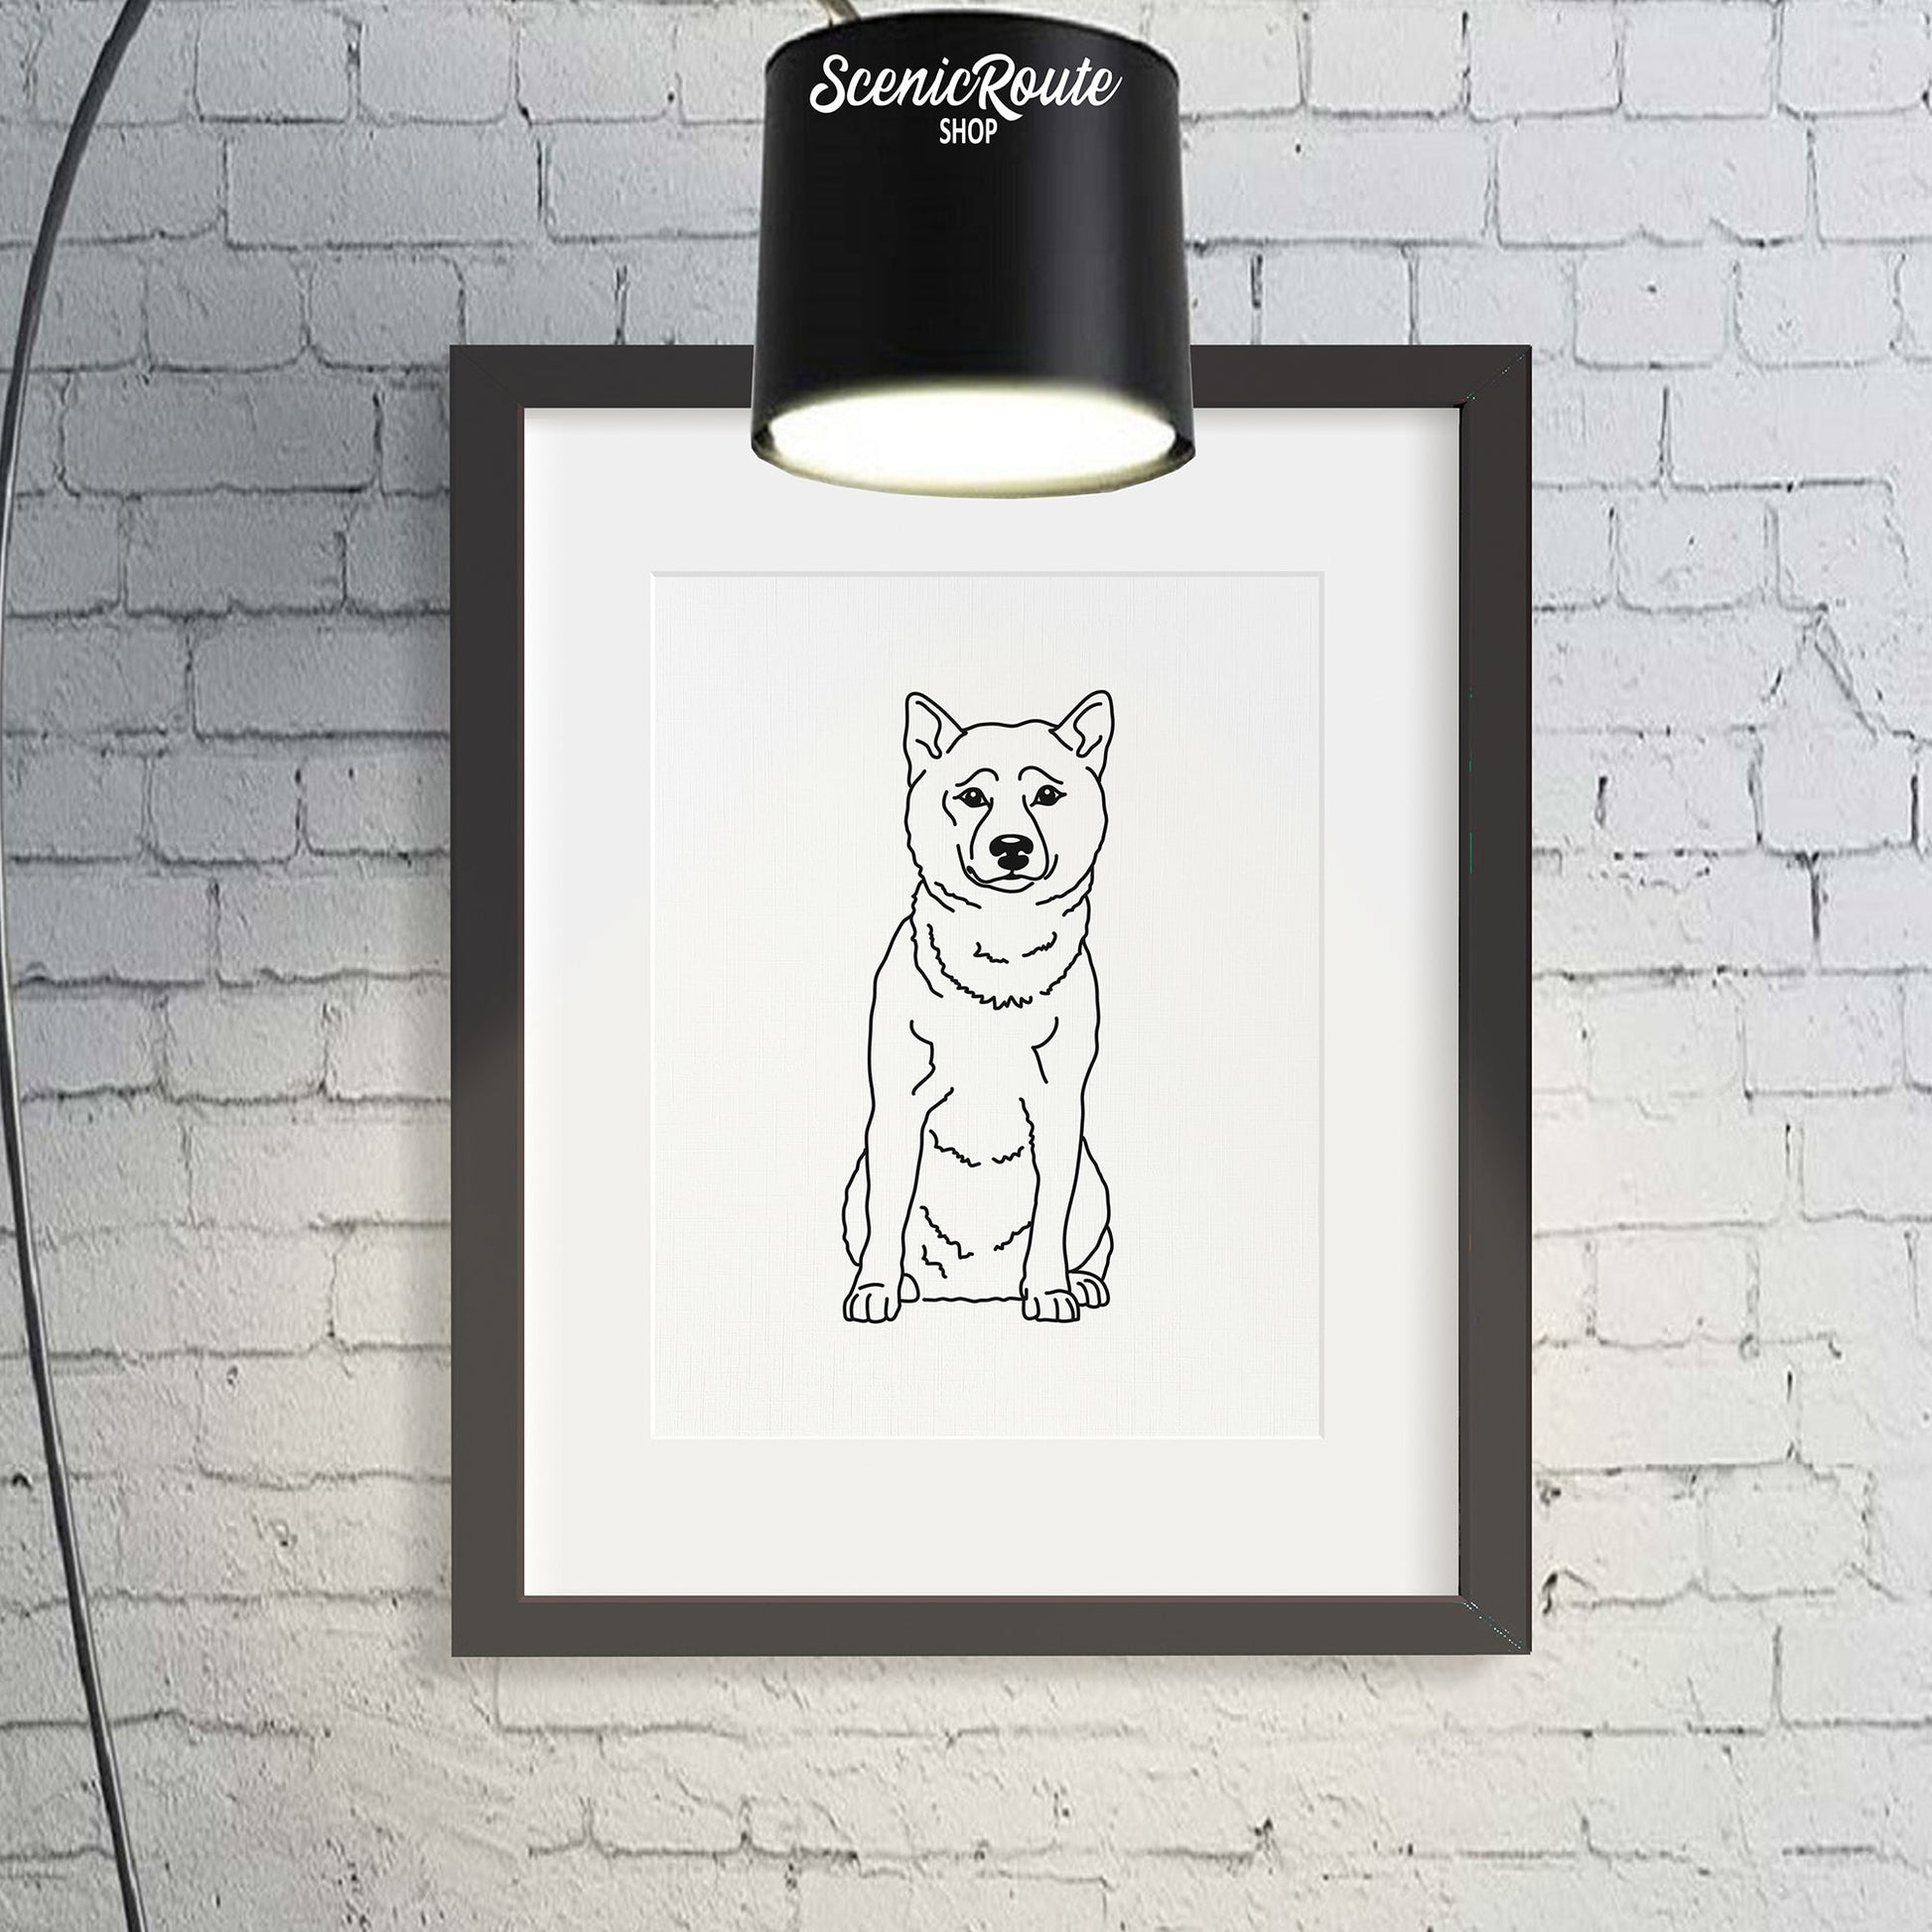 A framed line art drawing of a Shiba Inu dog on a brick wall with a lamp